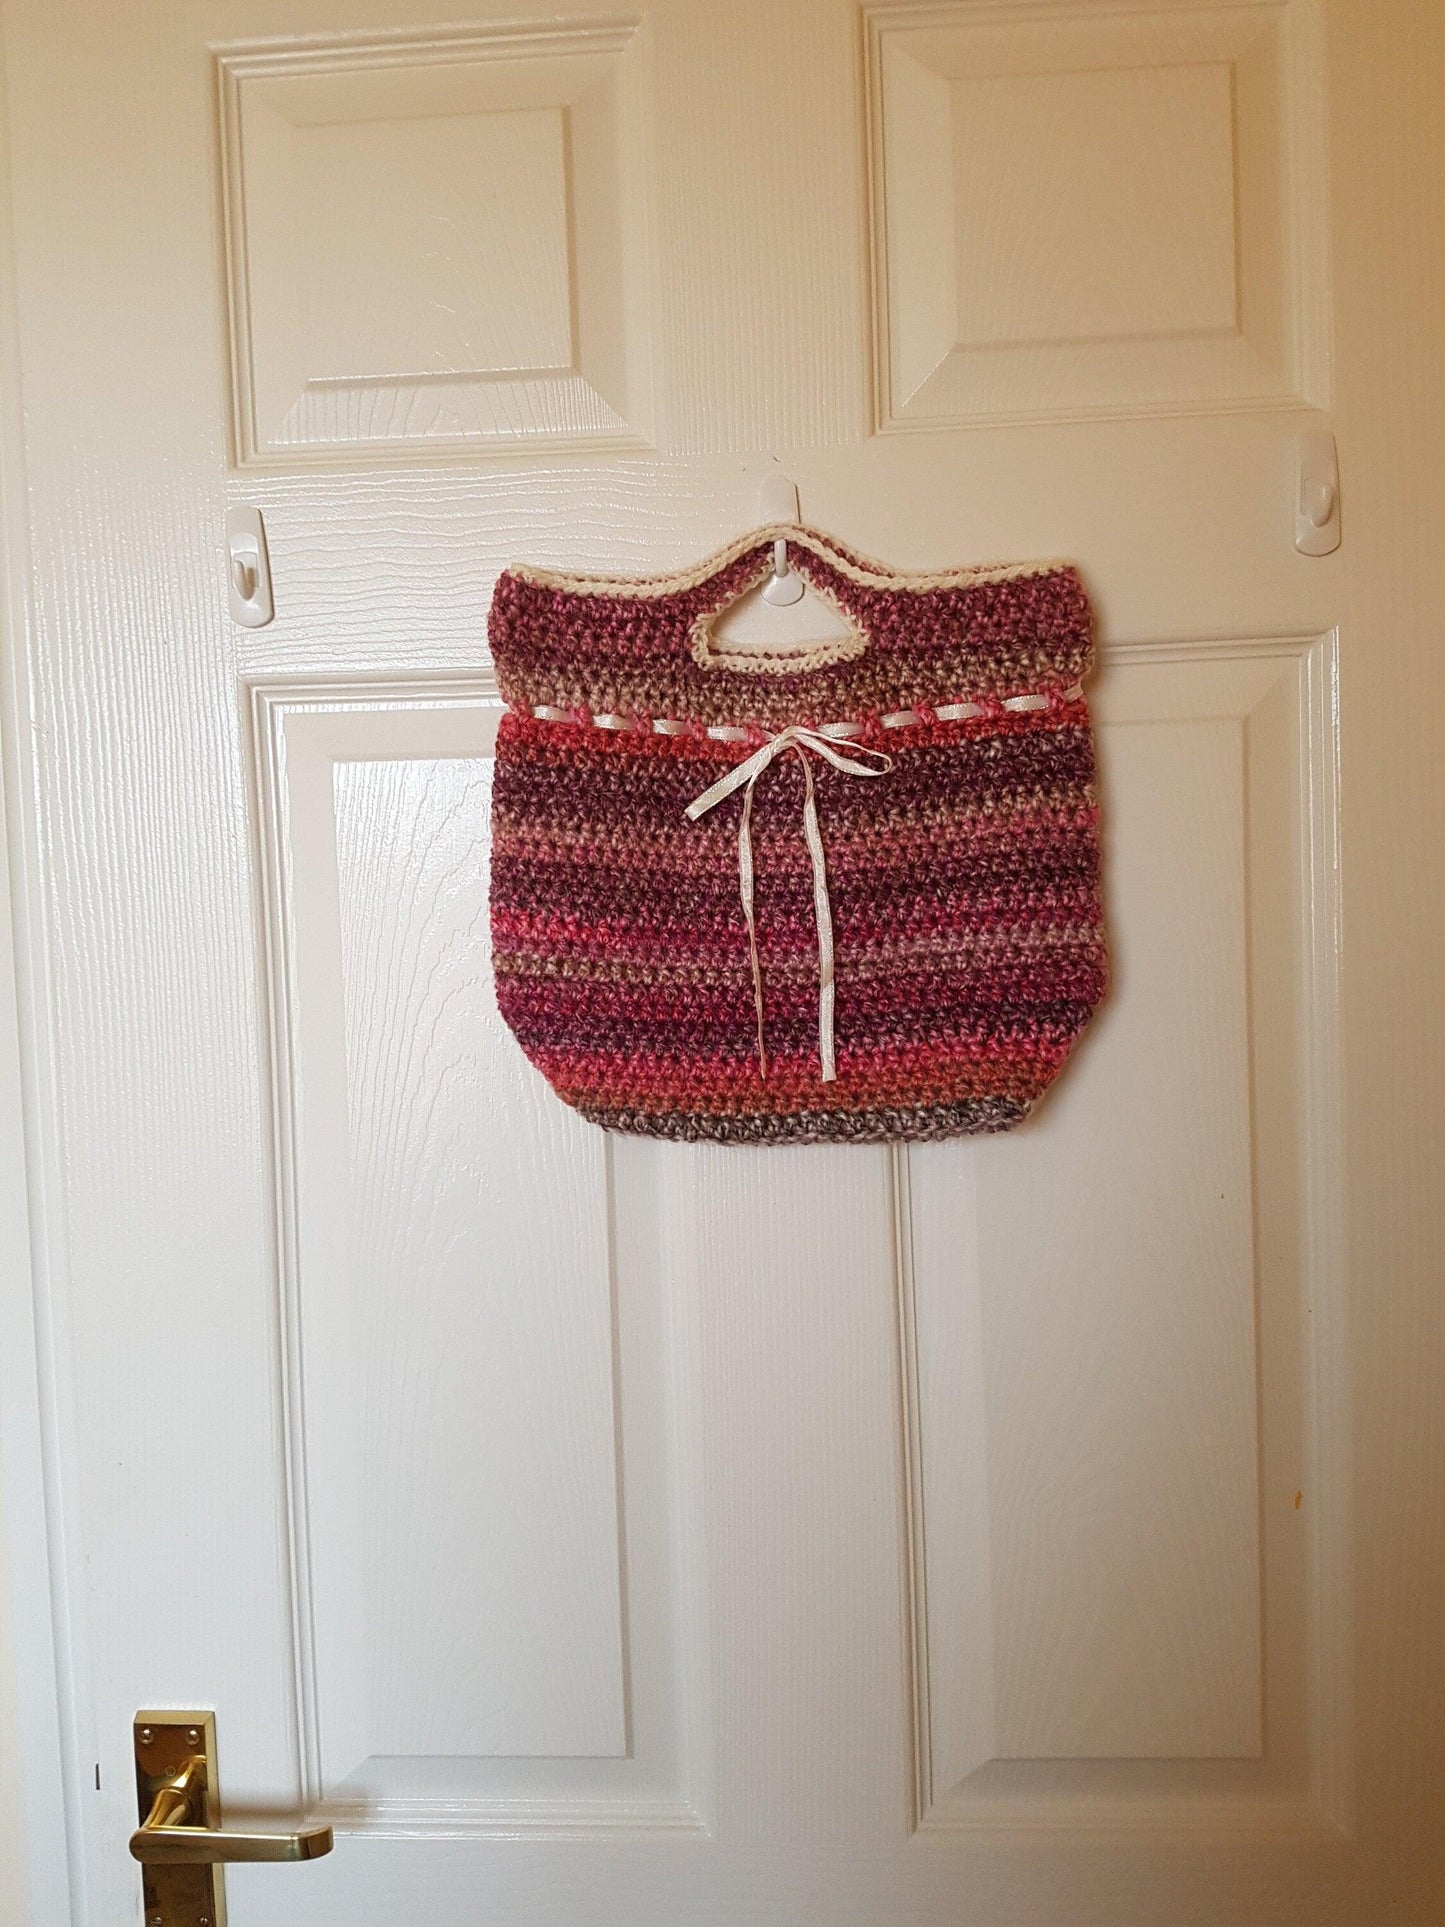 Handmade crochet handbag in mixed pink yarn. Shown hanging on the back of an internal door to demonstrate size